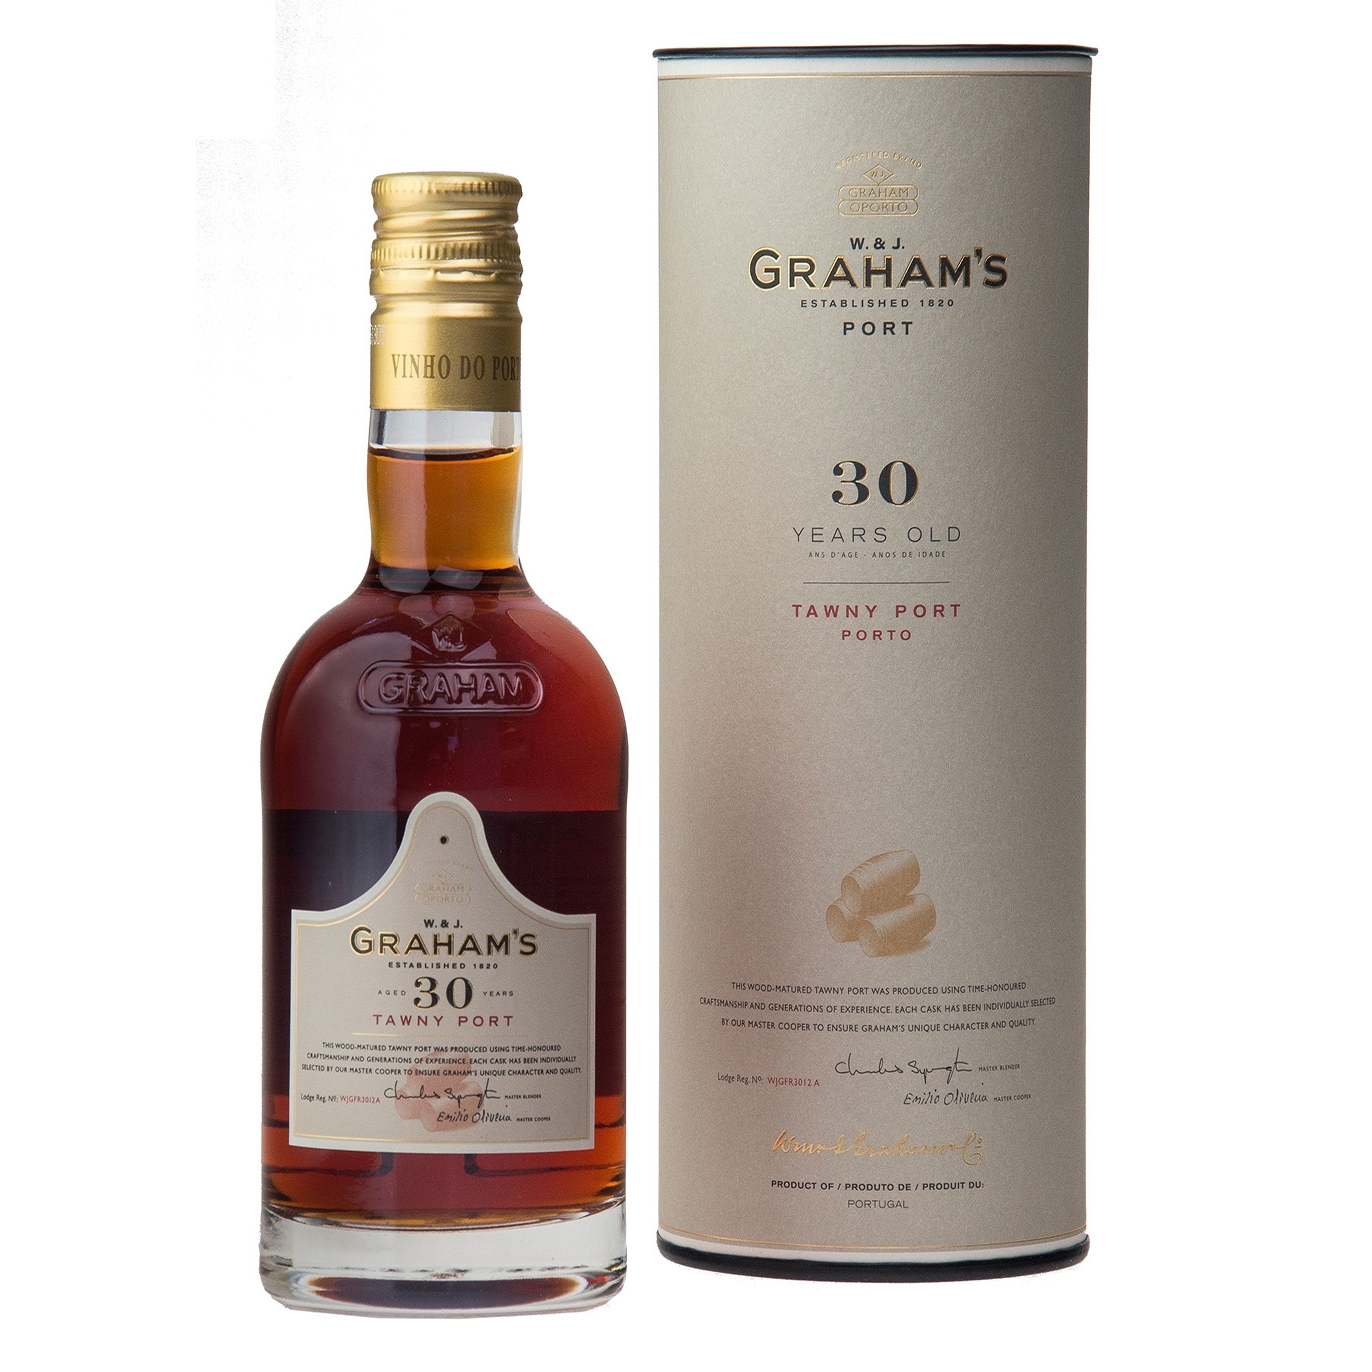 W & J Graham's 30 Year Old Tawny Port 200ml Port And Fortified Wine